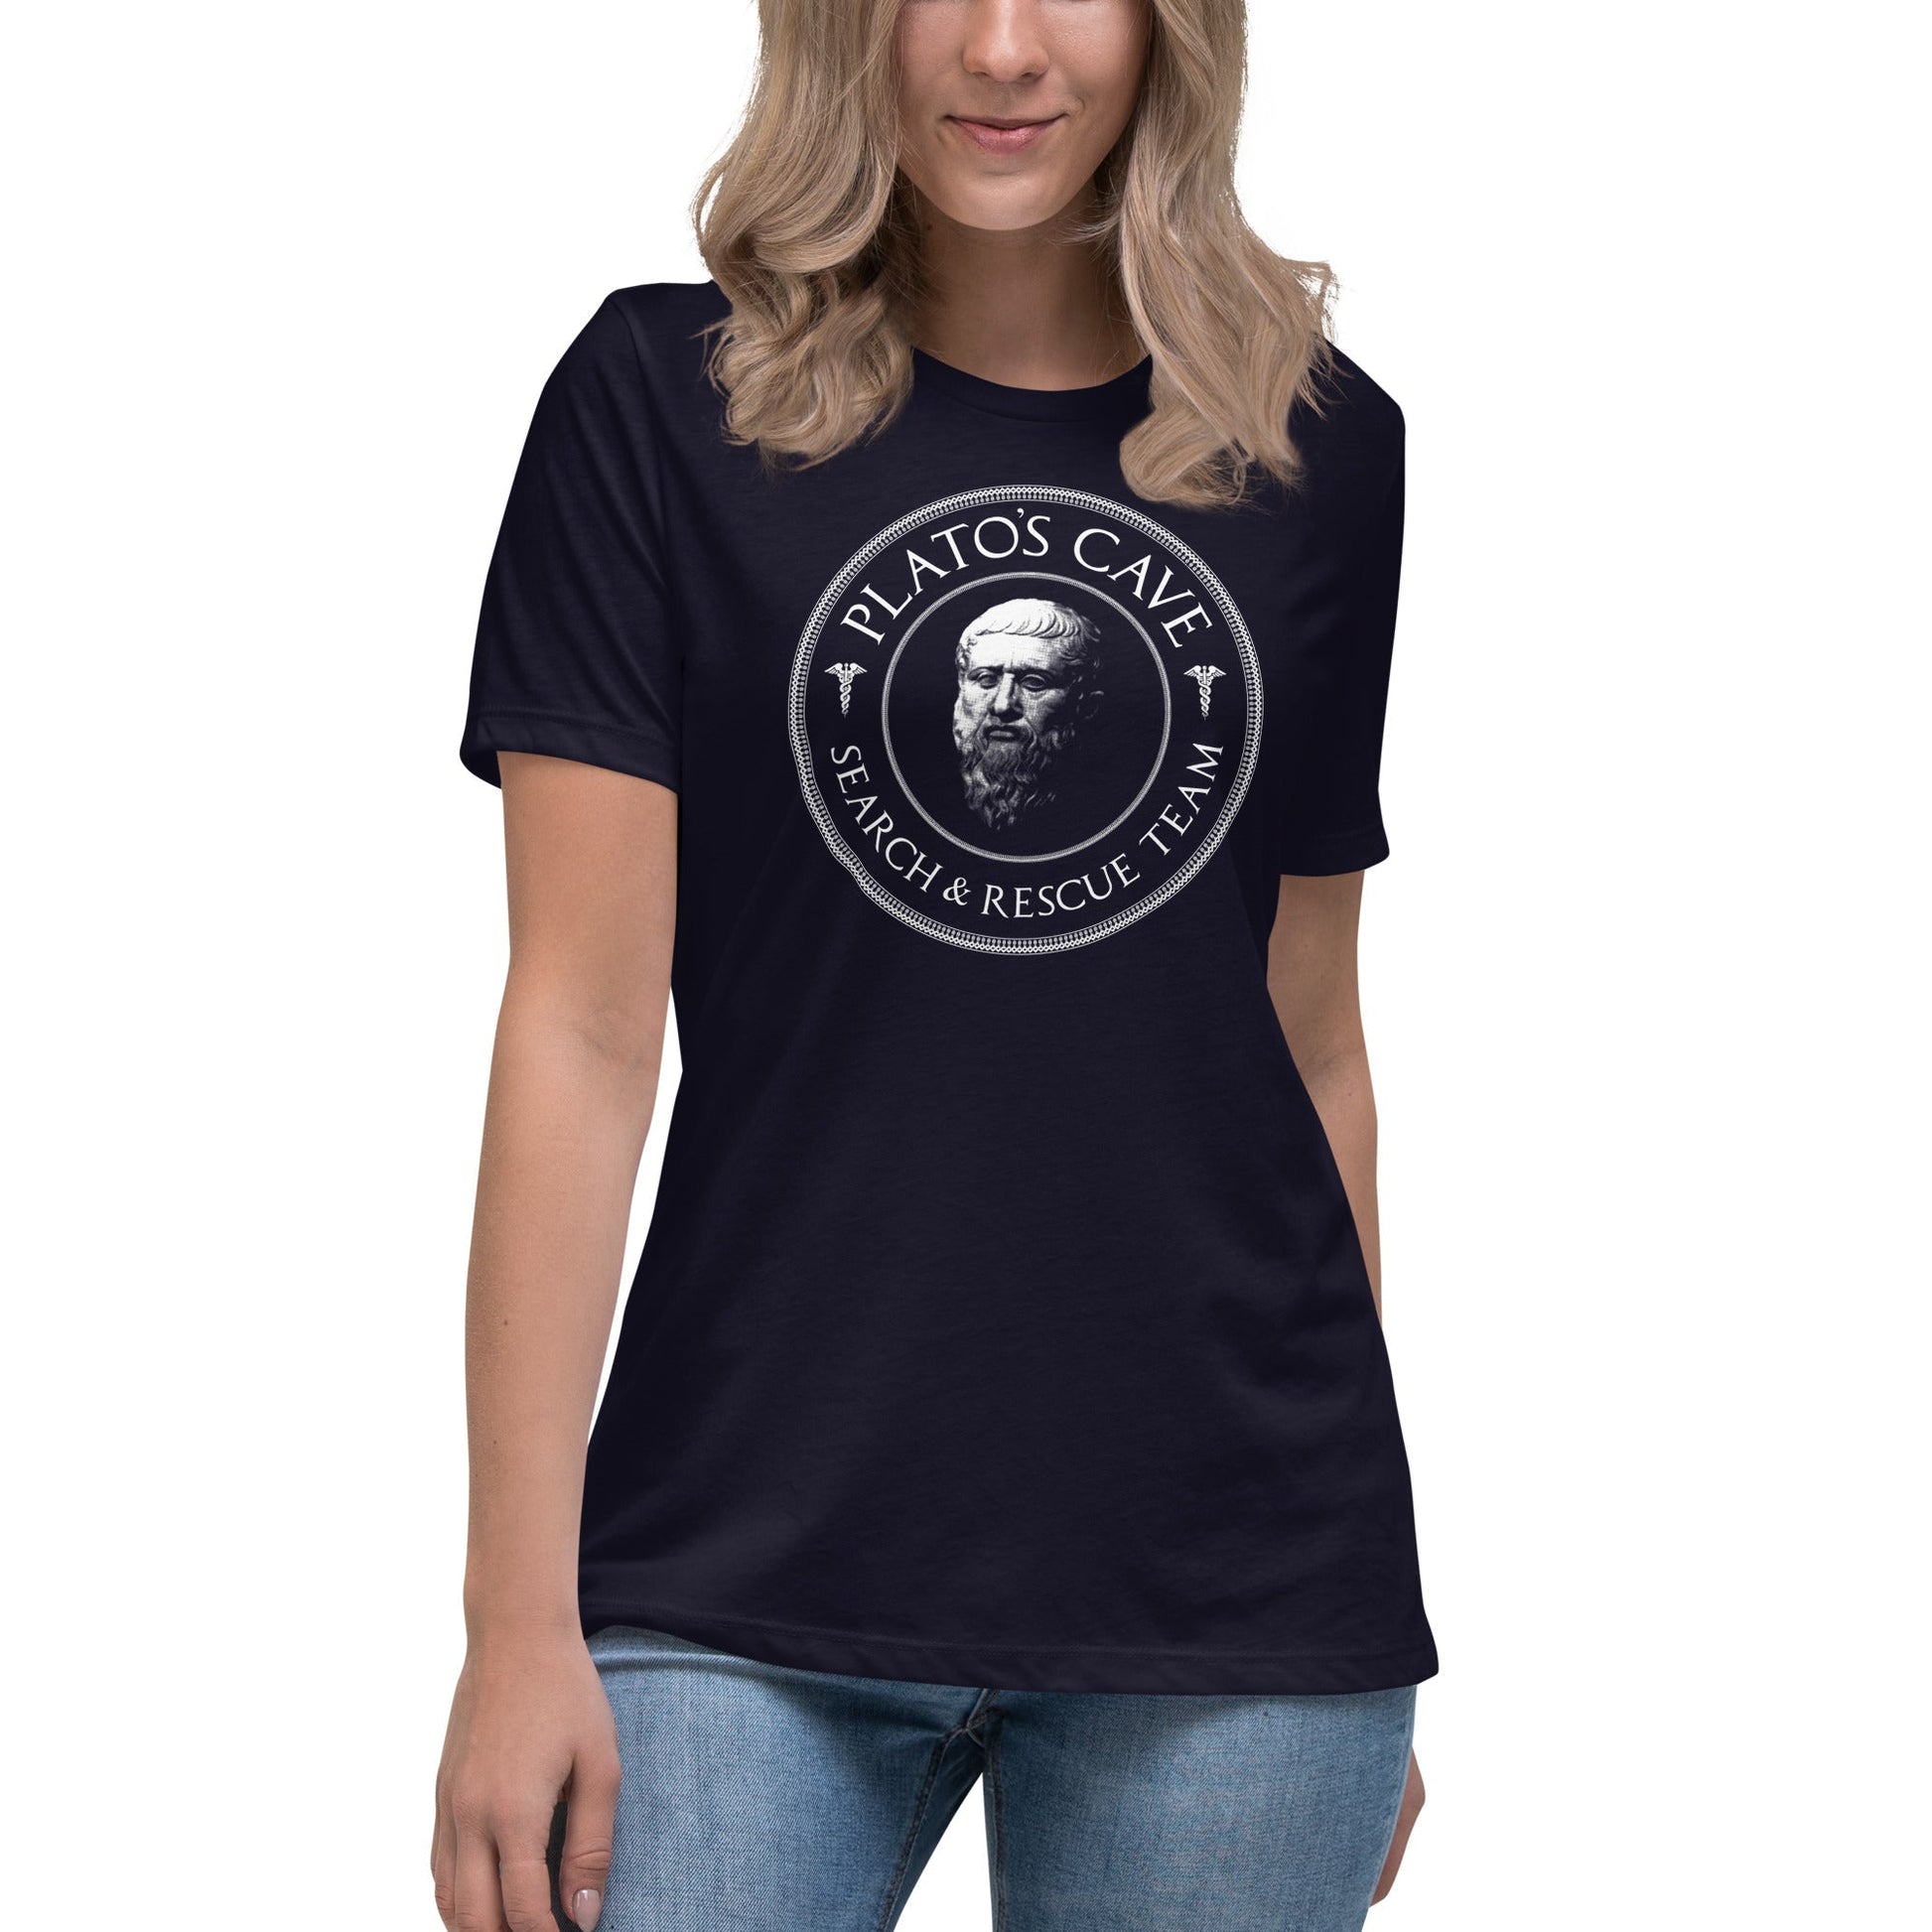 Plato's Cave Search and Rescue Team - Women's T-Shirt